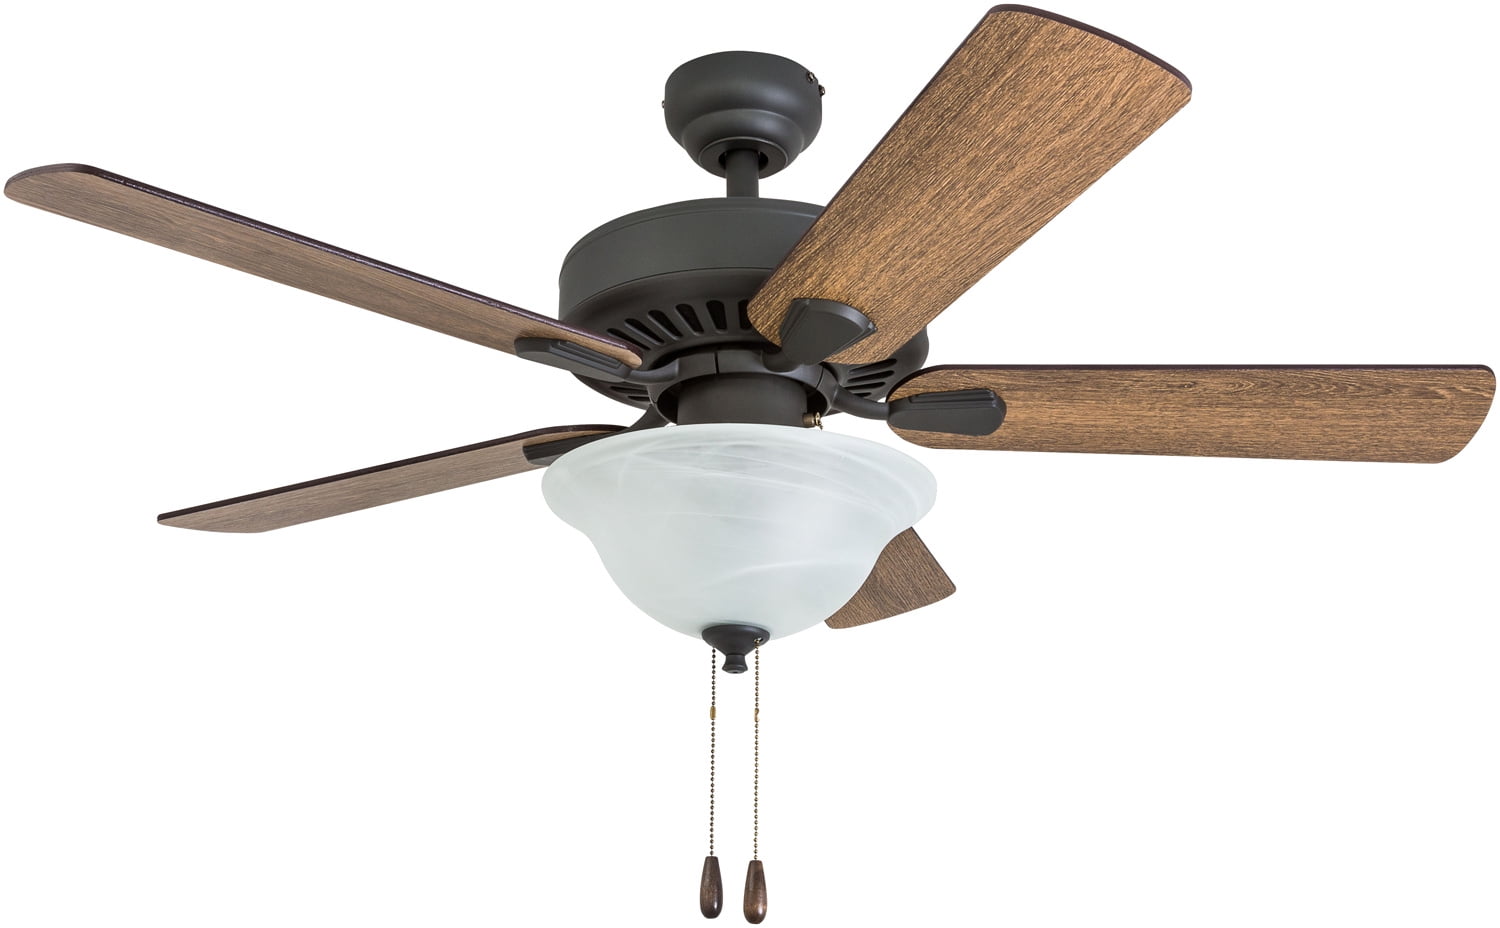 Bronze/Brown Palm for sale online Honeywell Sunset Key 52" Ceiling Fan with LED Light 